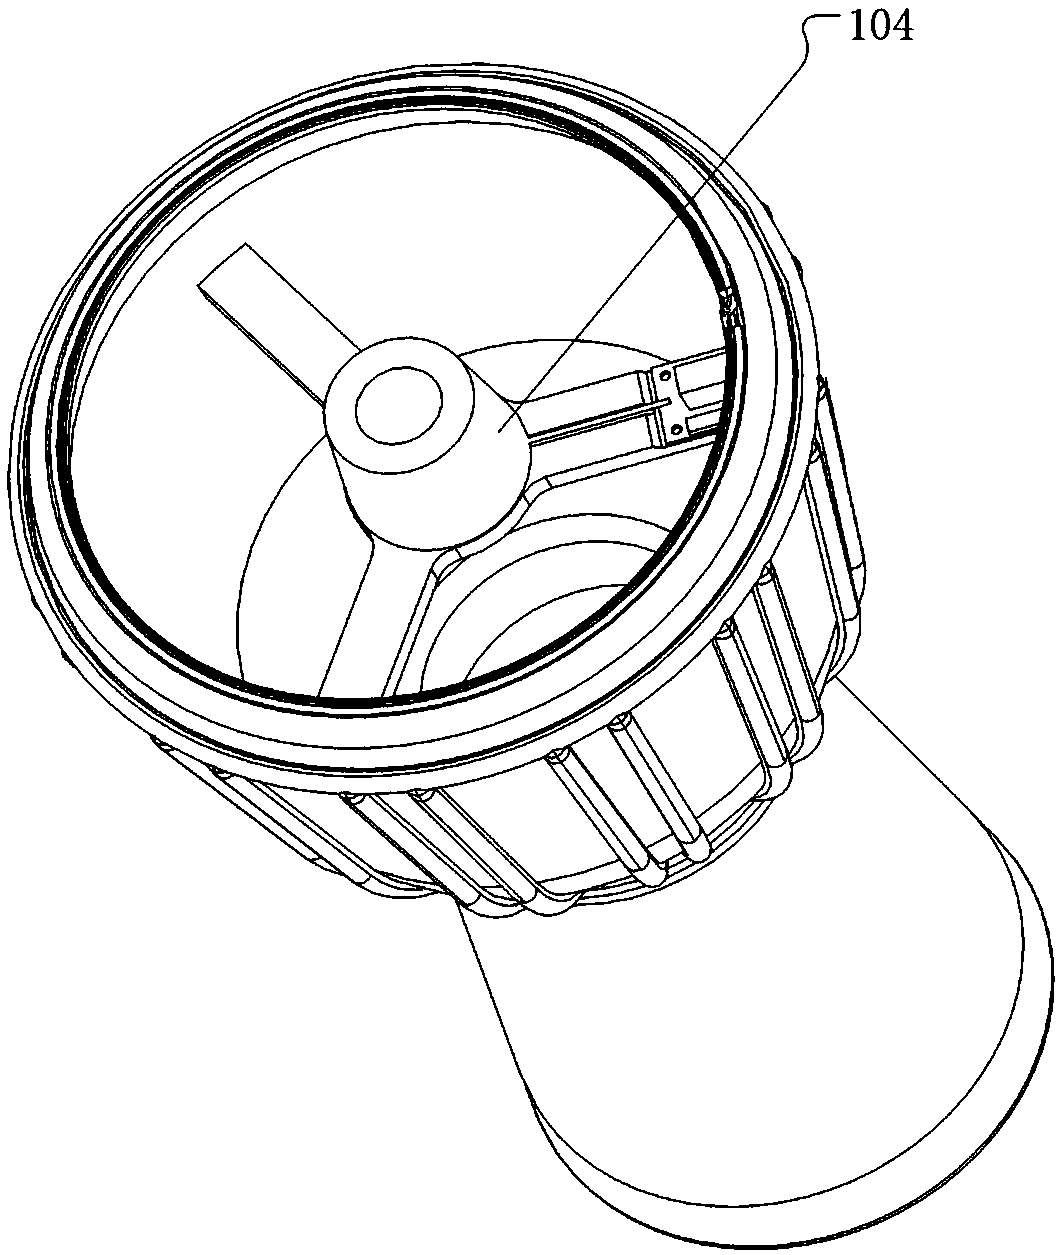 African drum and sound pickup device thereof